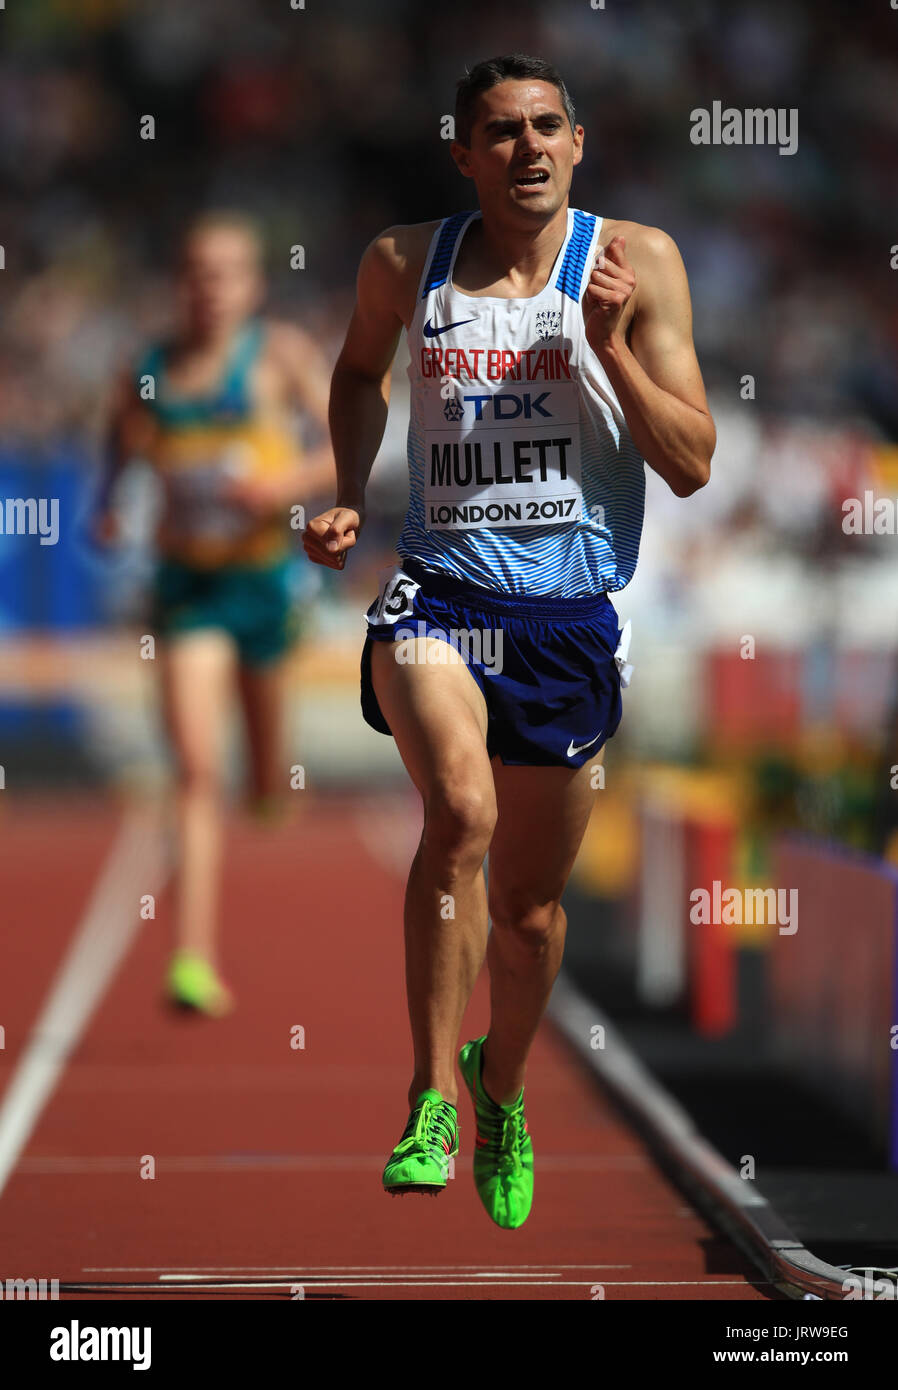 Great Britain's Rob Mullett in the Men's 3000m Steeplechase heat three during day three of the 2017 IAAF World Championships at the London Stadium. Stock Photo